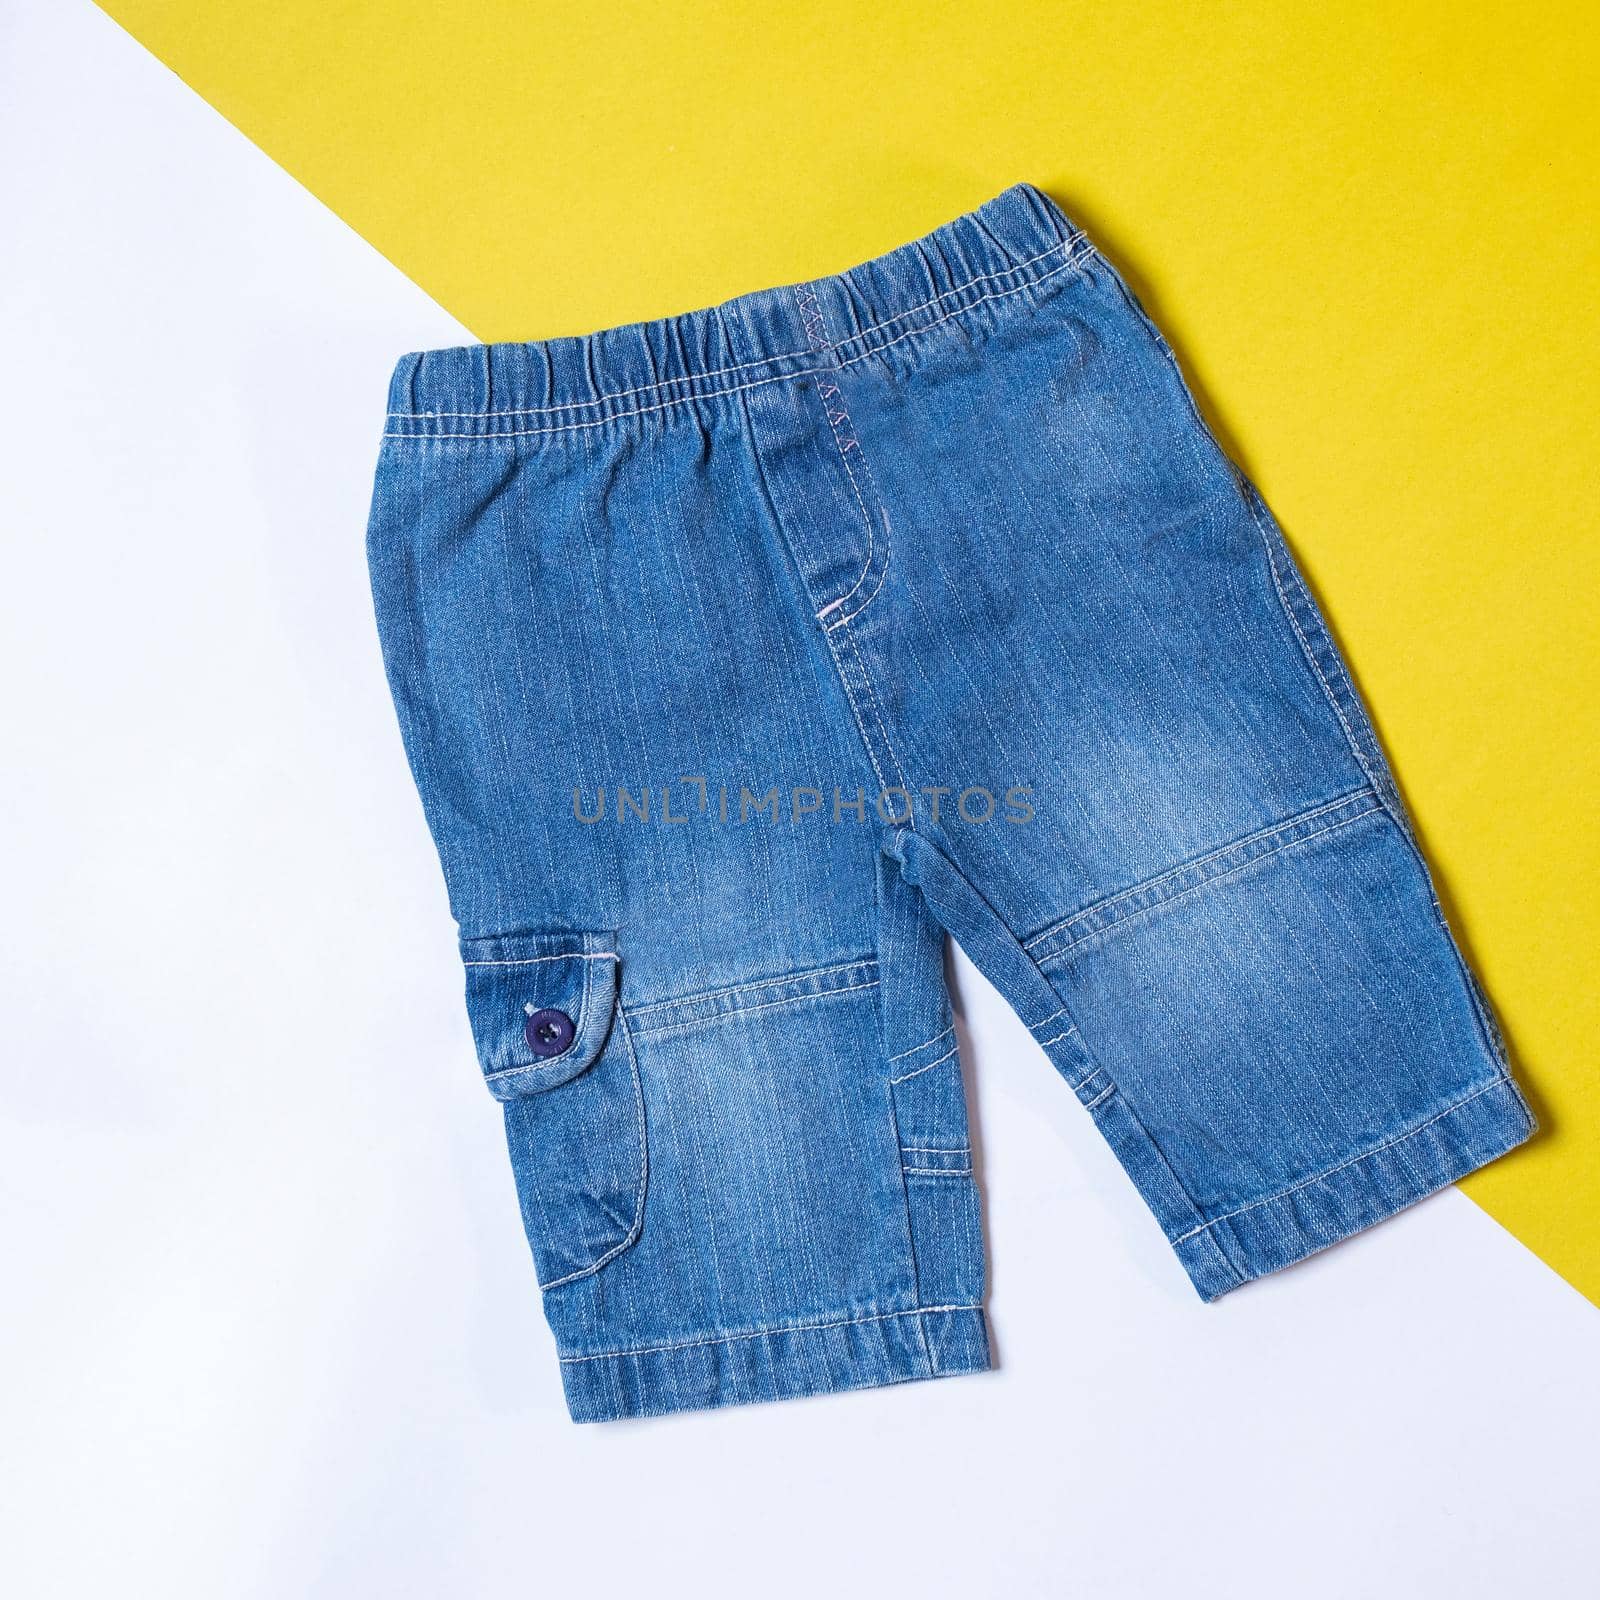 Jeans shorts isolated on white yellow background by ferhad